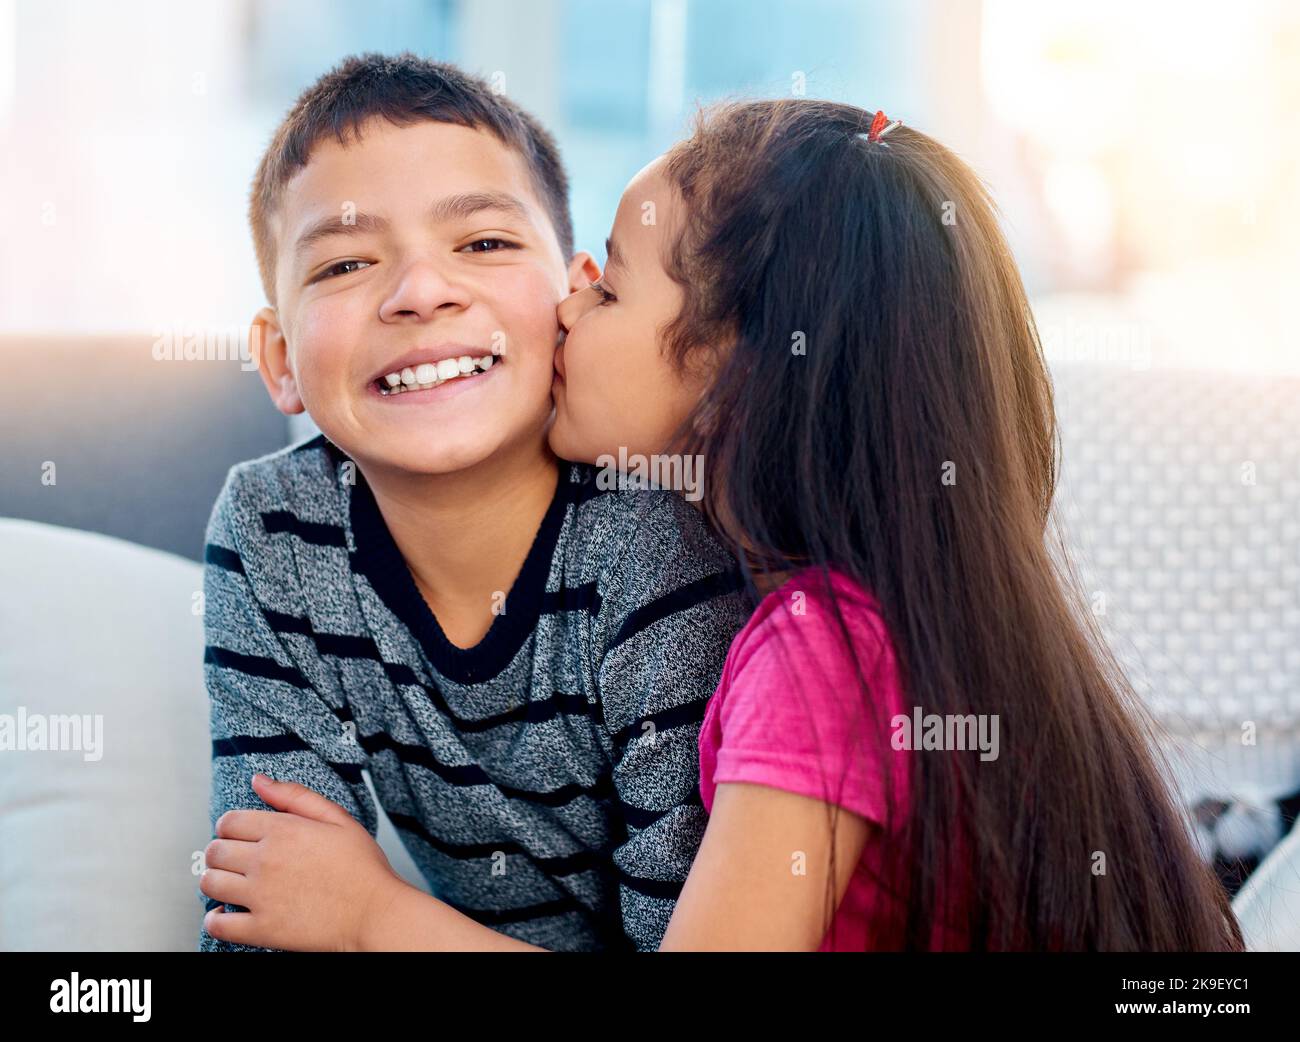 Big kisses on the cheek for her big brother. an adorable little girl kissing her big brother on the cheek at home. Stock Photo